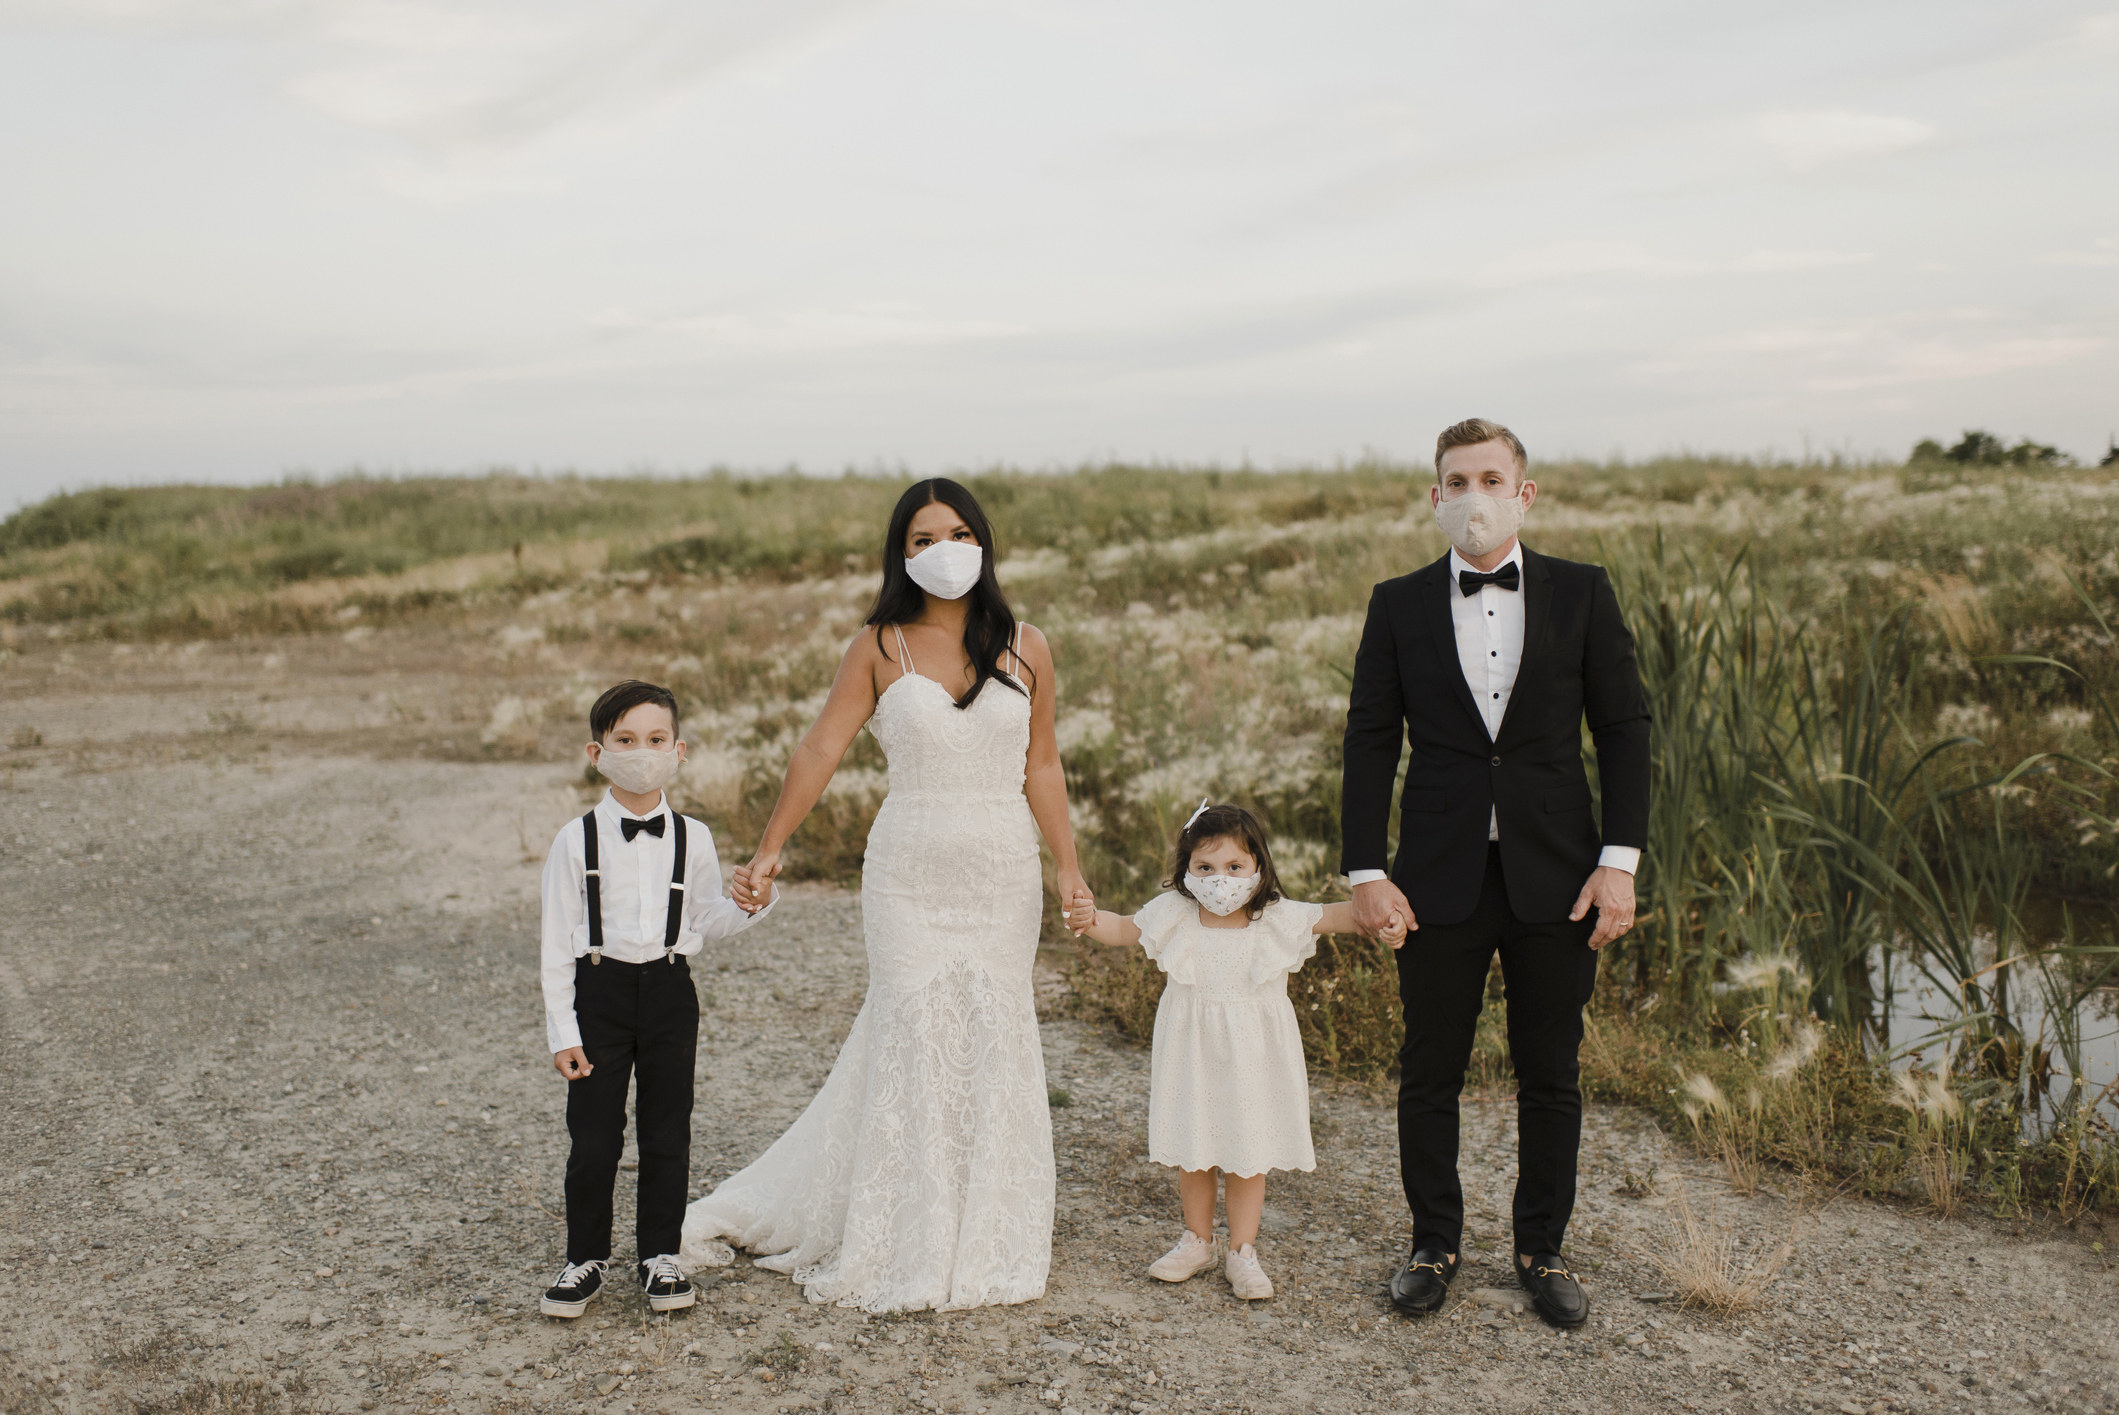 A bride and groom wearing face masks while holding the hands of two children, also wearing masks